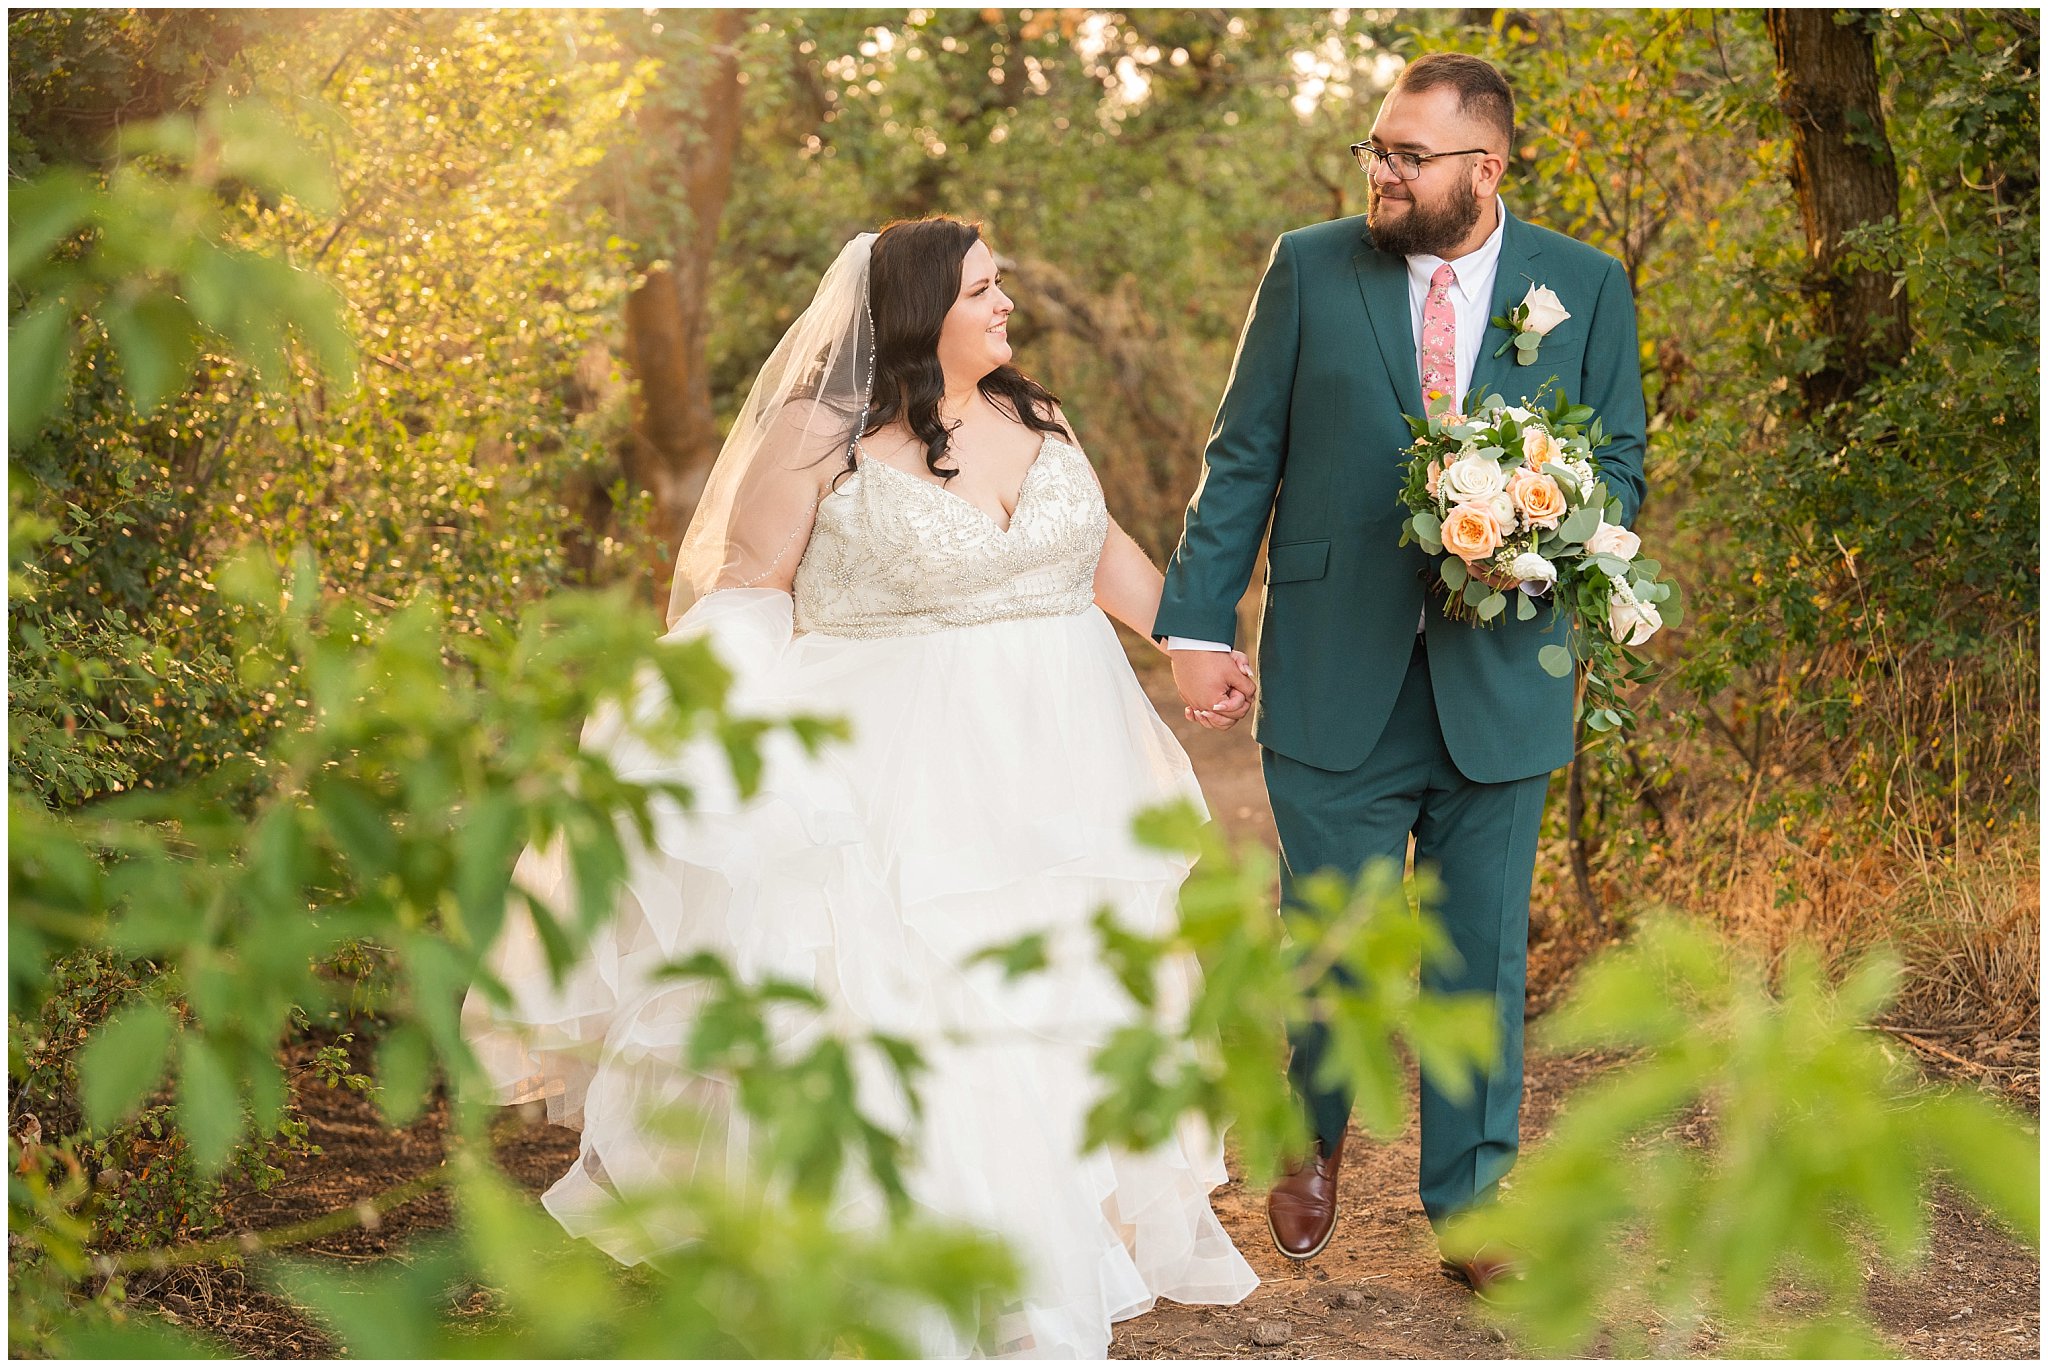 Bride and groom in green suit candid portraits in a forest | Green and Salmon Pink Utah Wedding | Oak Hills | Jessie and Dallin Photography